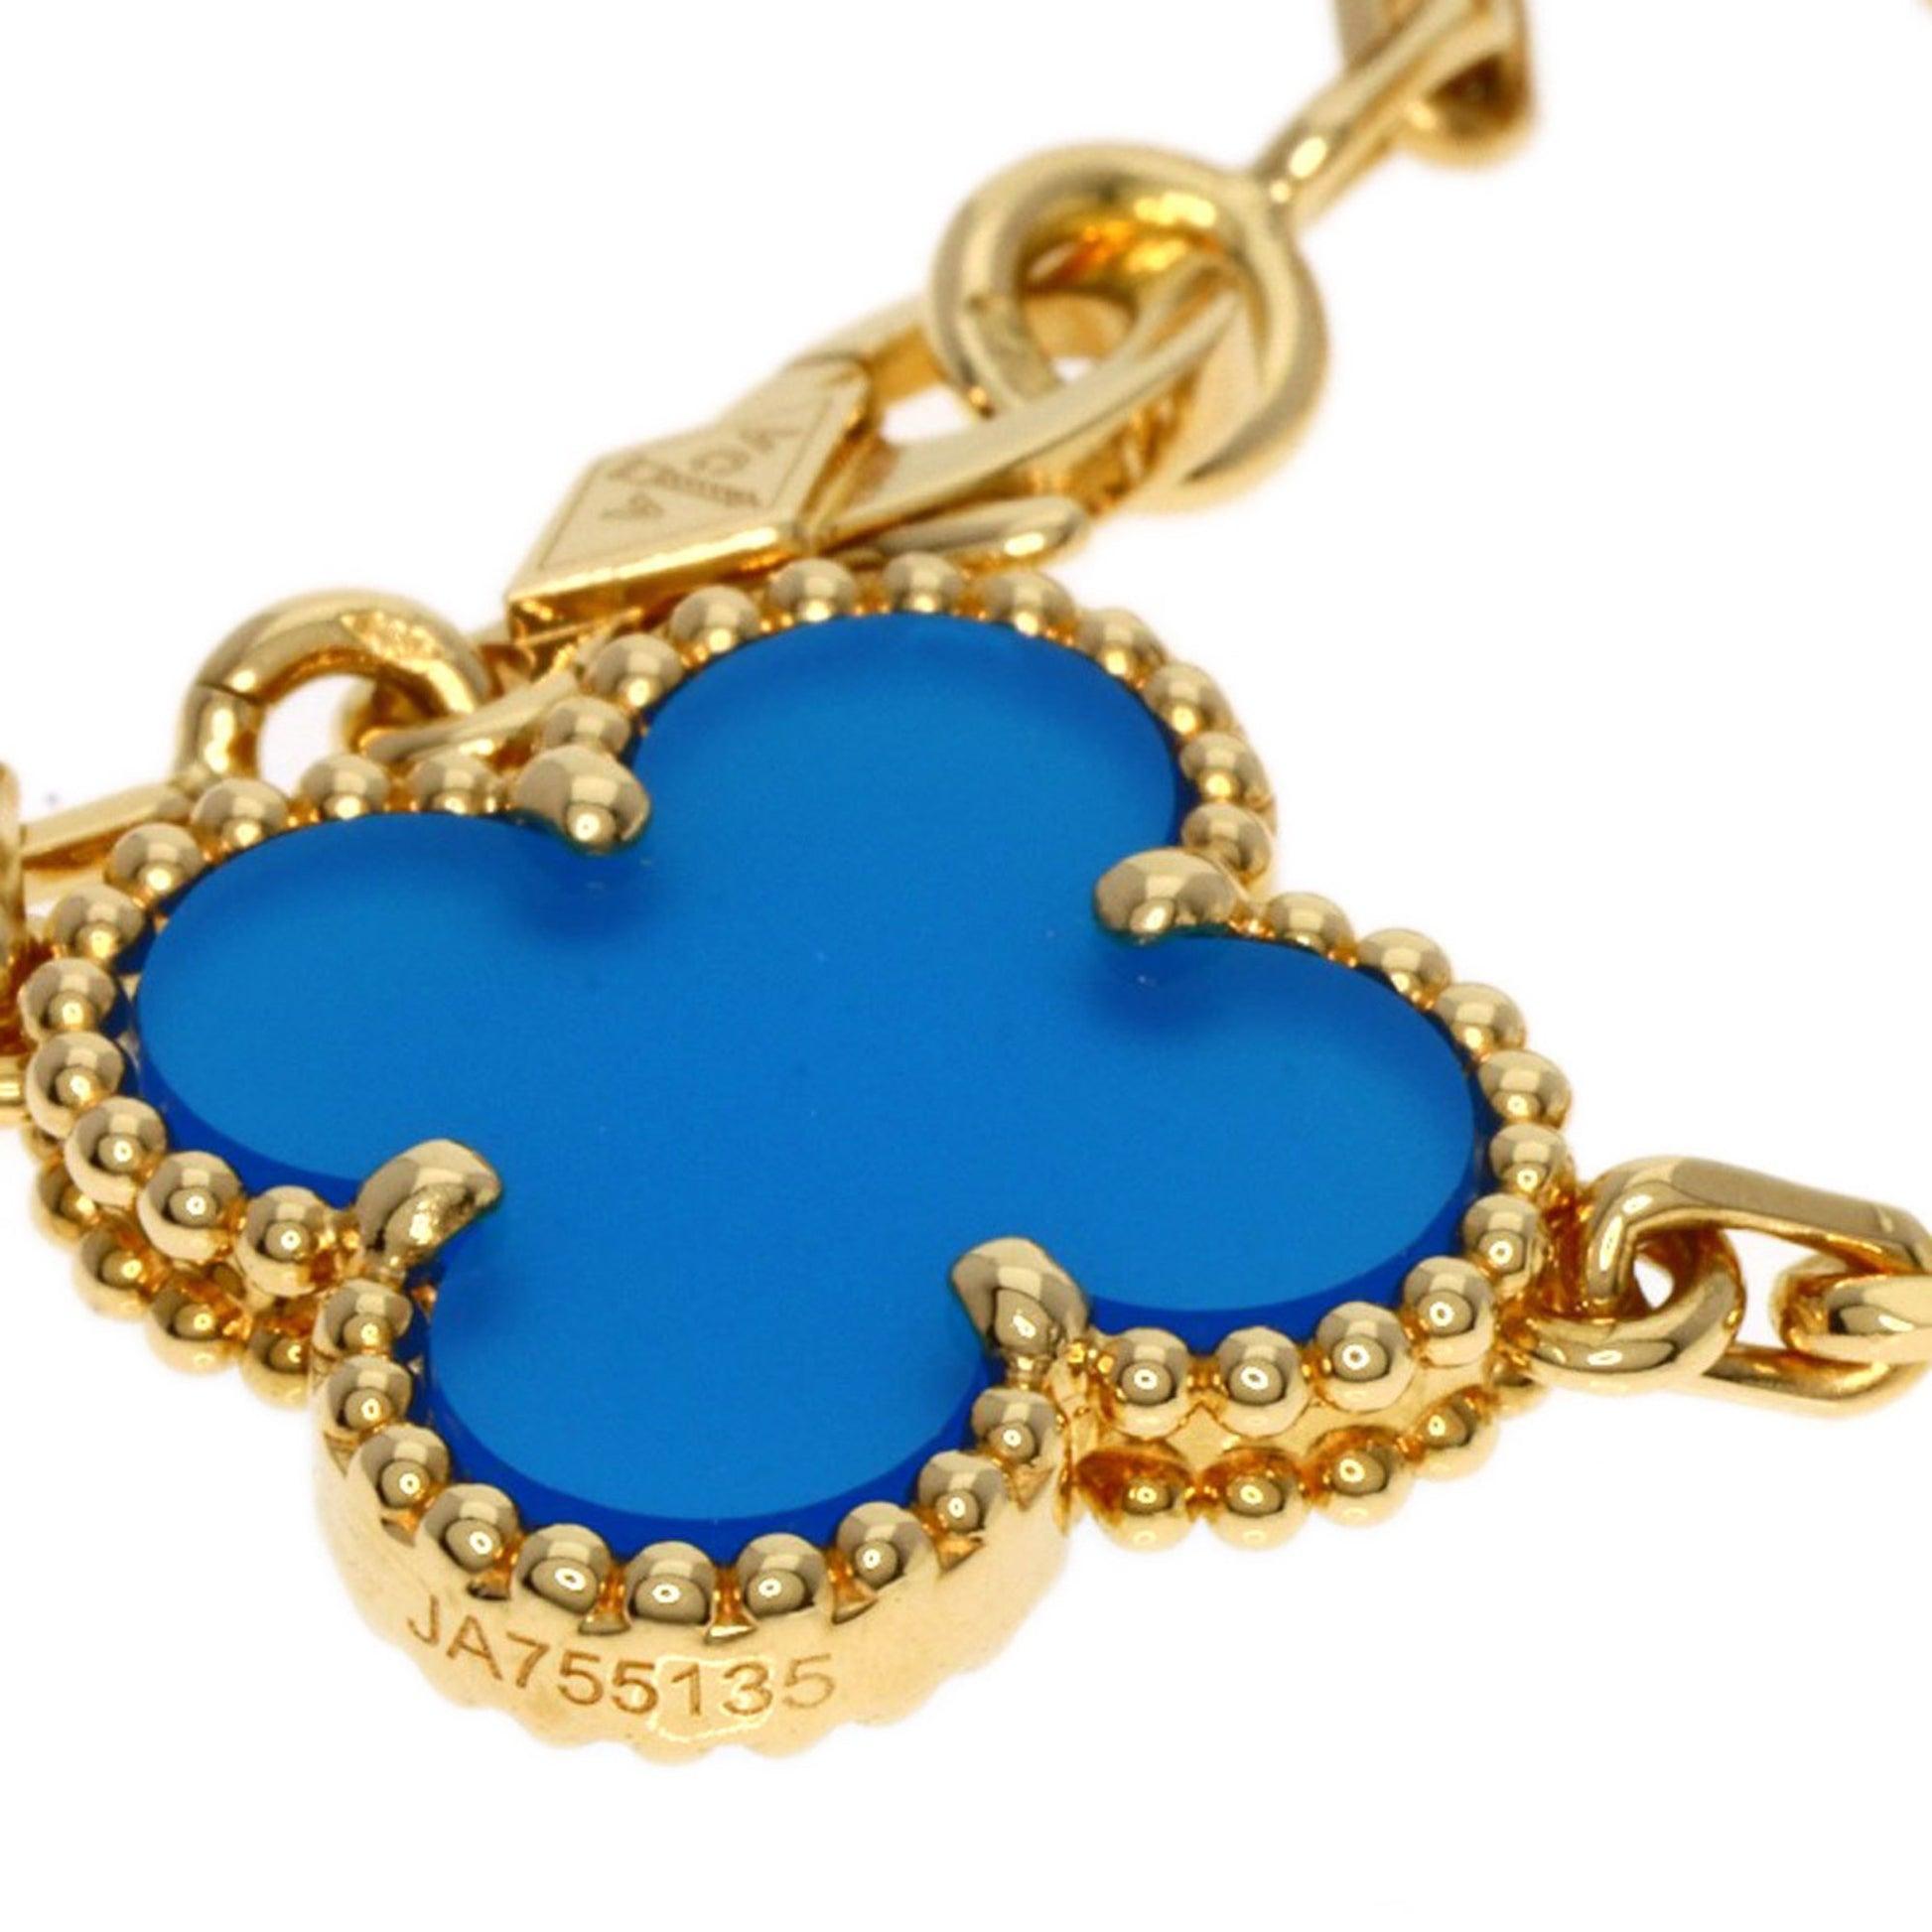 Women's Van Cleef & Arpels Alhambra Blue Agate Necklace in 18K Yellow Gold For Sale